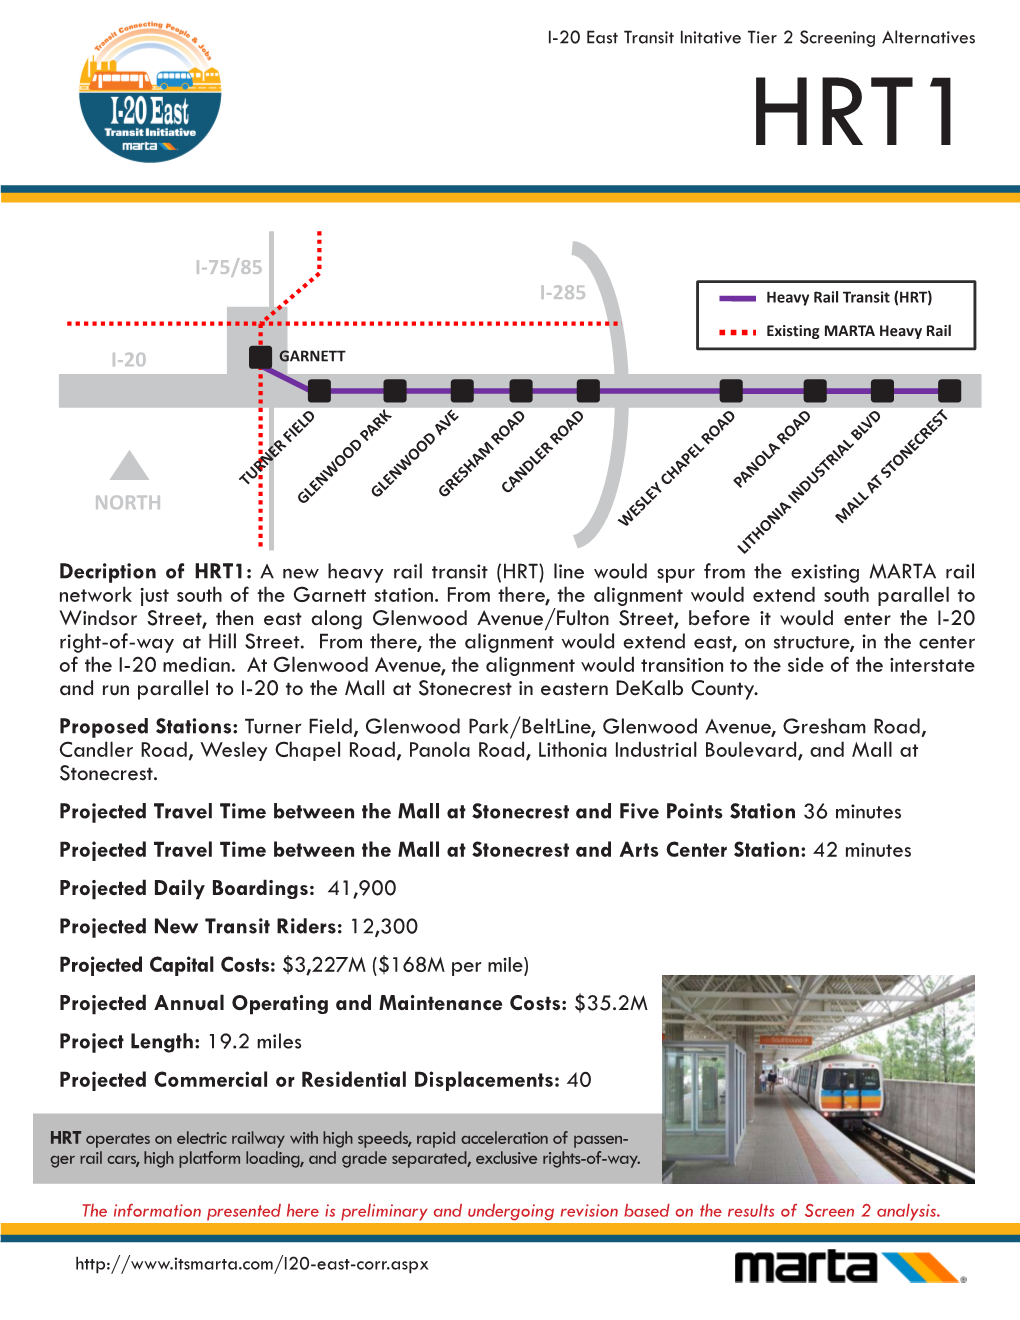 Decription of HRT1: a New Heavy Rail Transit (HRT) Line Would Spur from the Existing MARTA Rail Network Just South of the Garnett Station